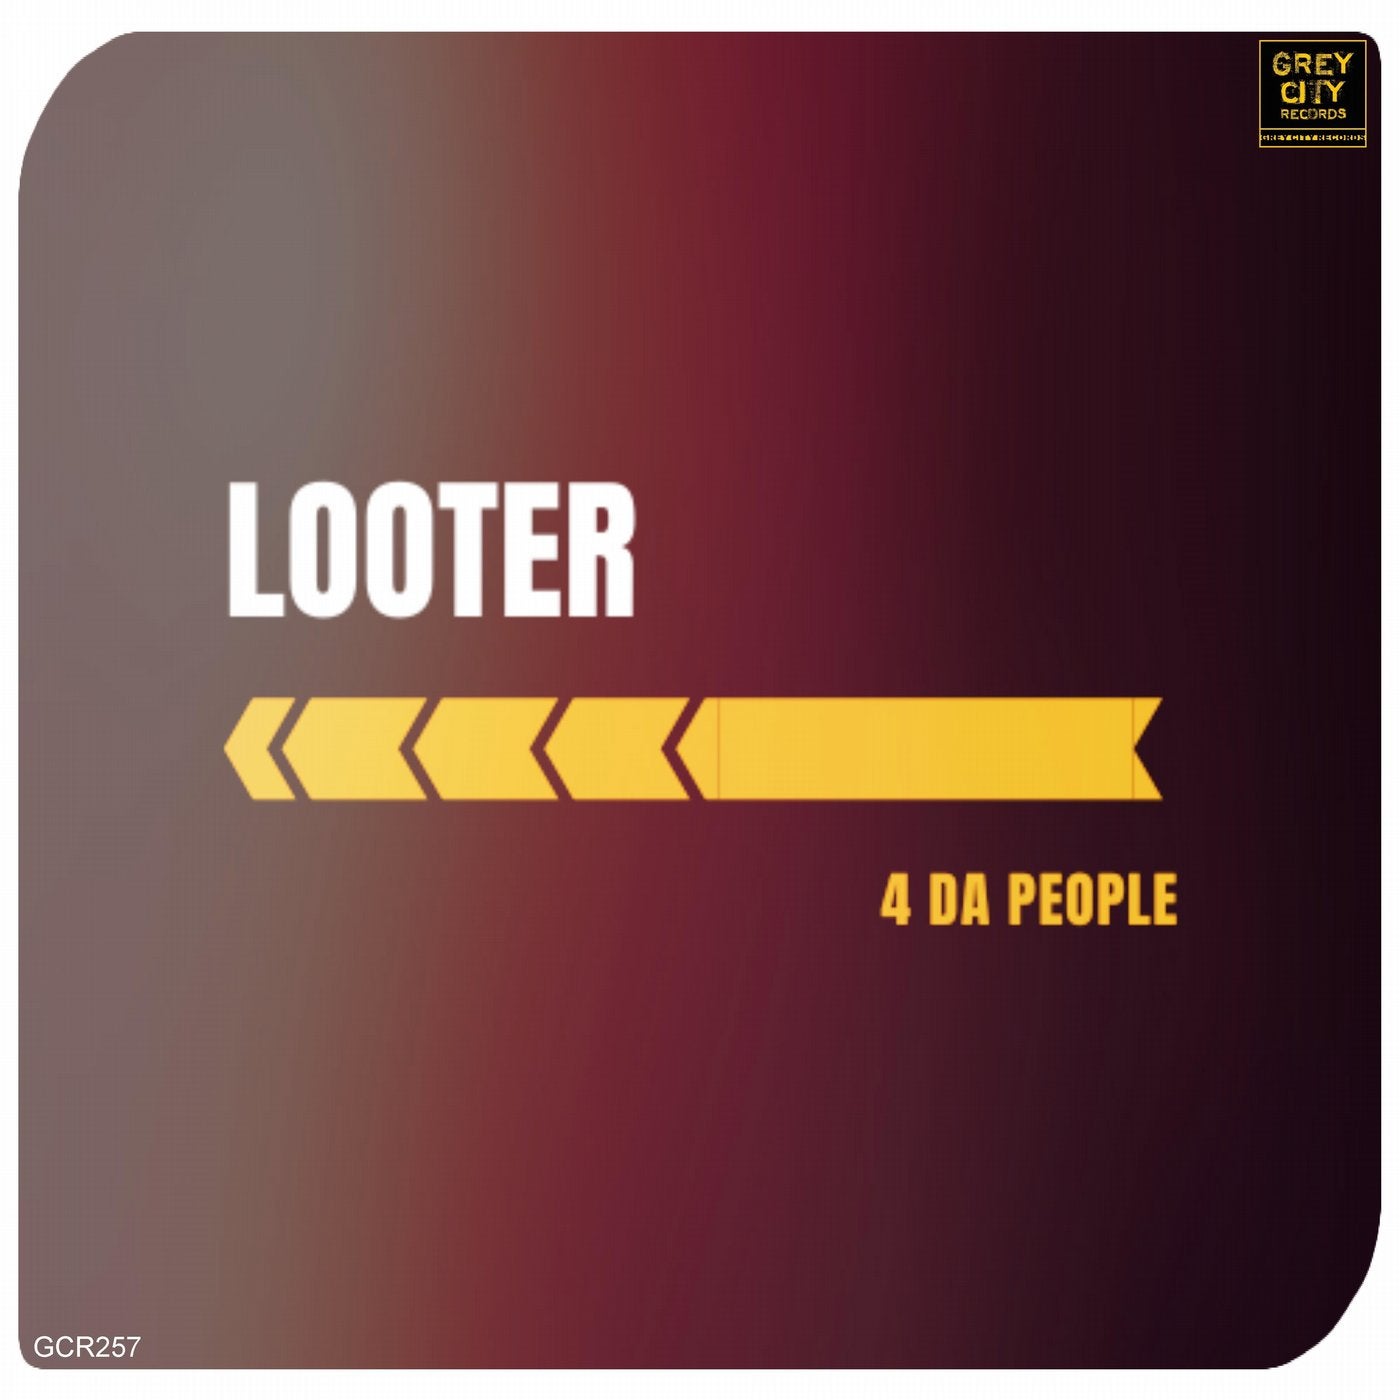 Looter